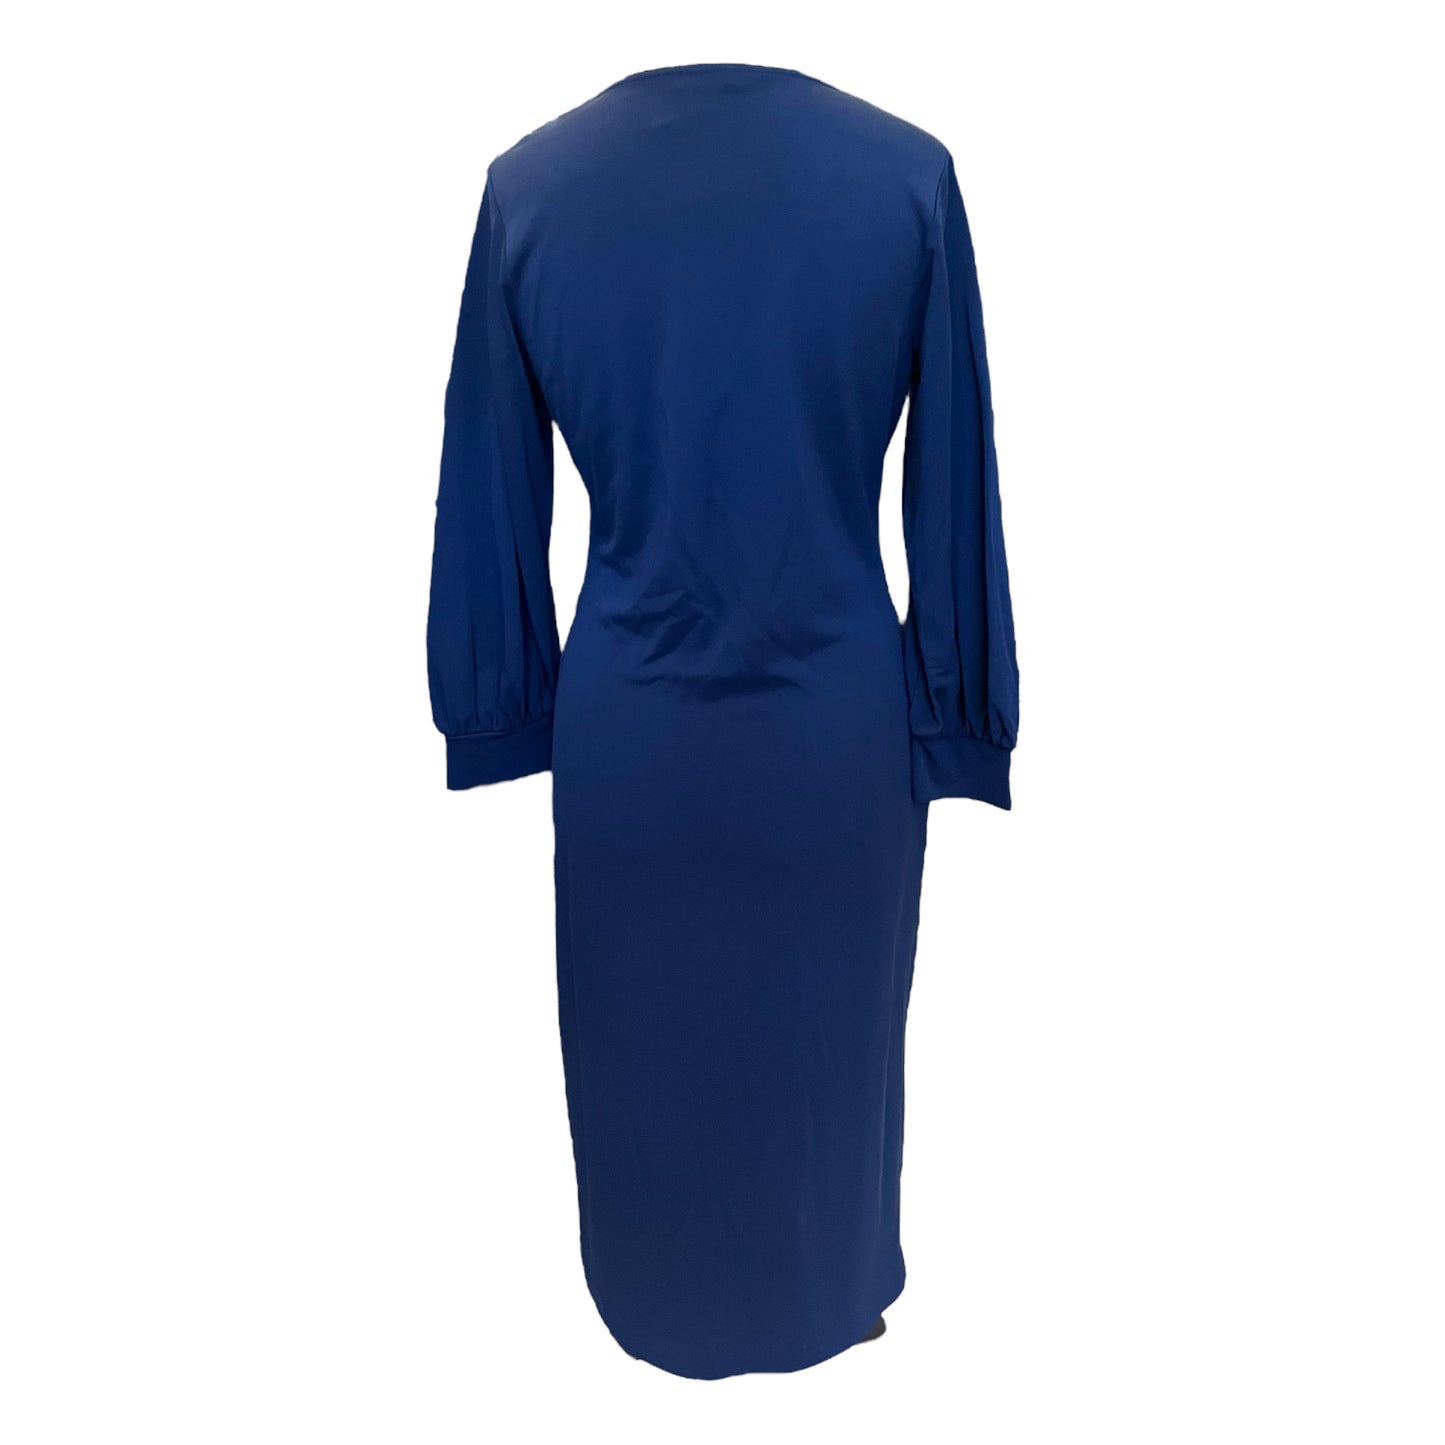 BRAND NEW WITH TAGS Jaeger Navy Dress